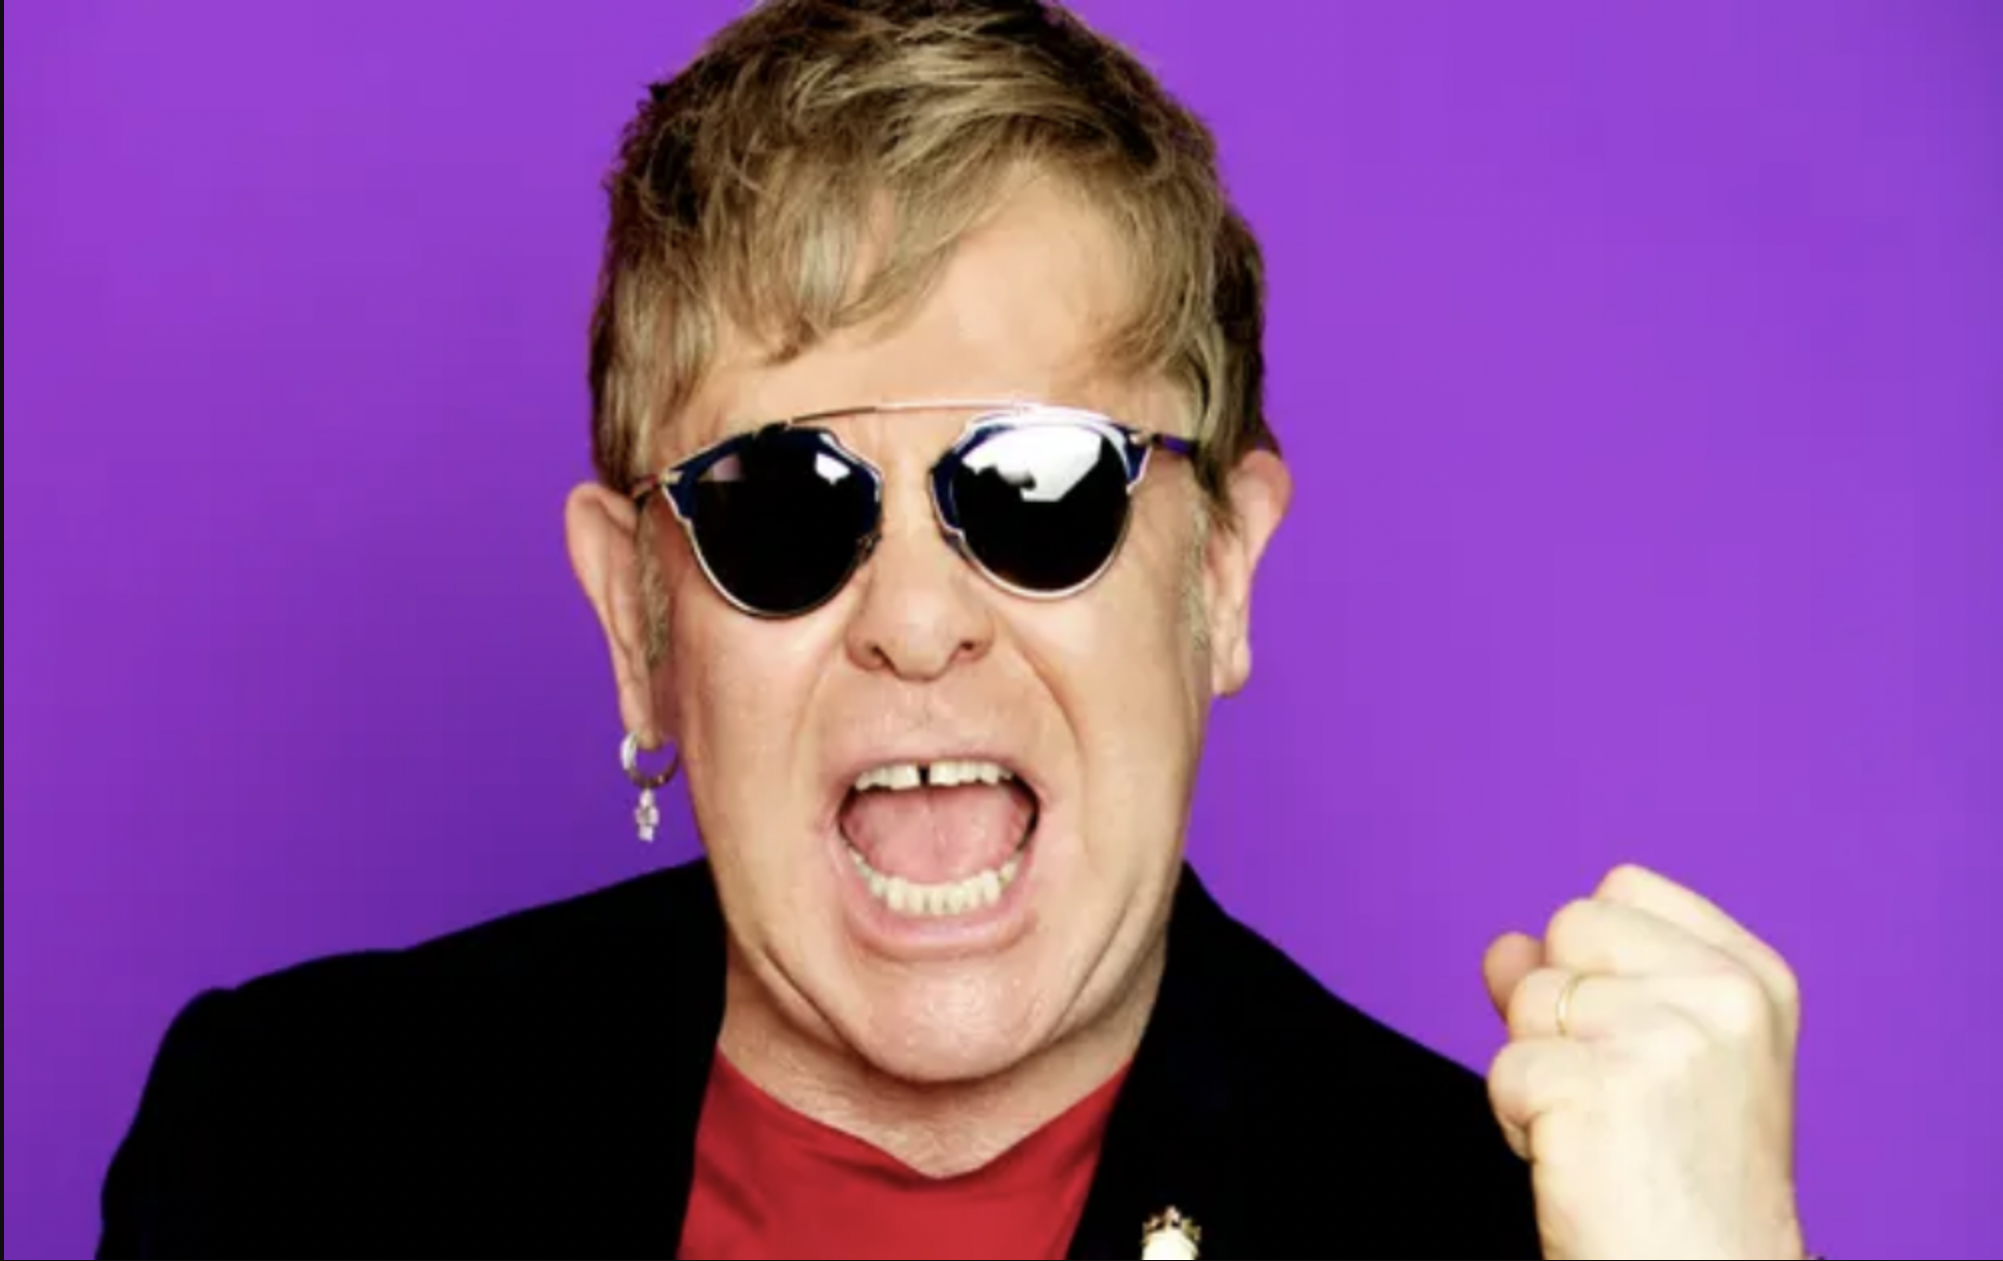 The Elton John Hair Transplant: Compared to yesteryears, it is visibly thicker (ctto John. Photograph: PR company handout from theguardian.com.)